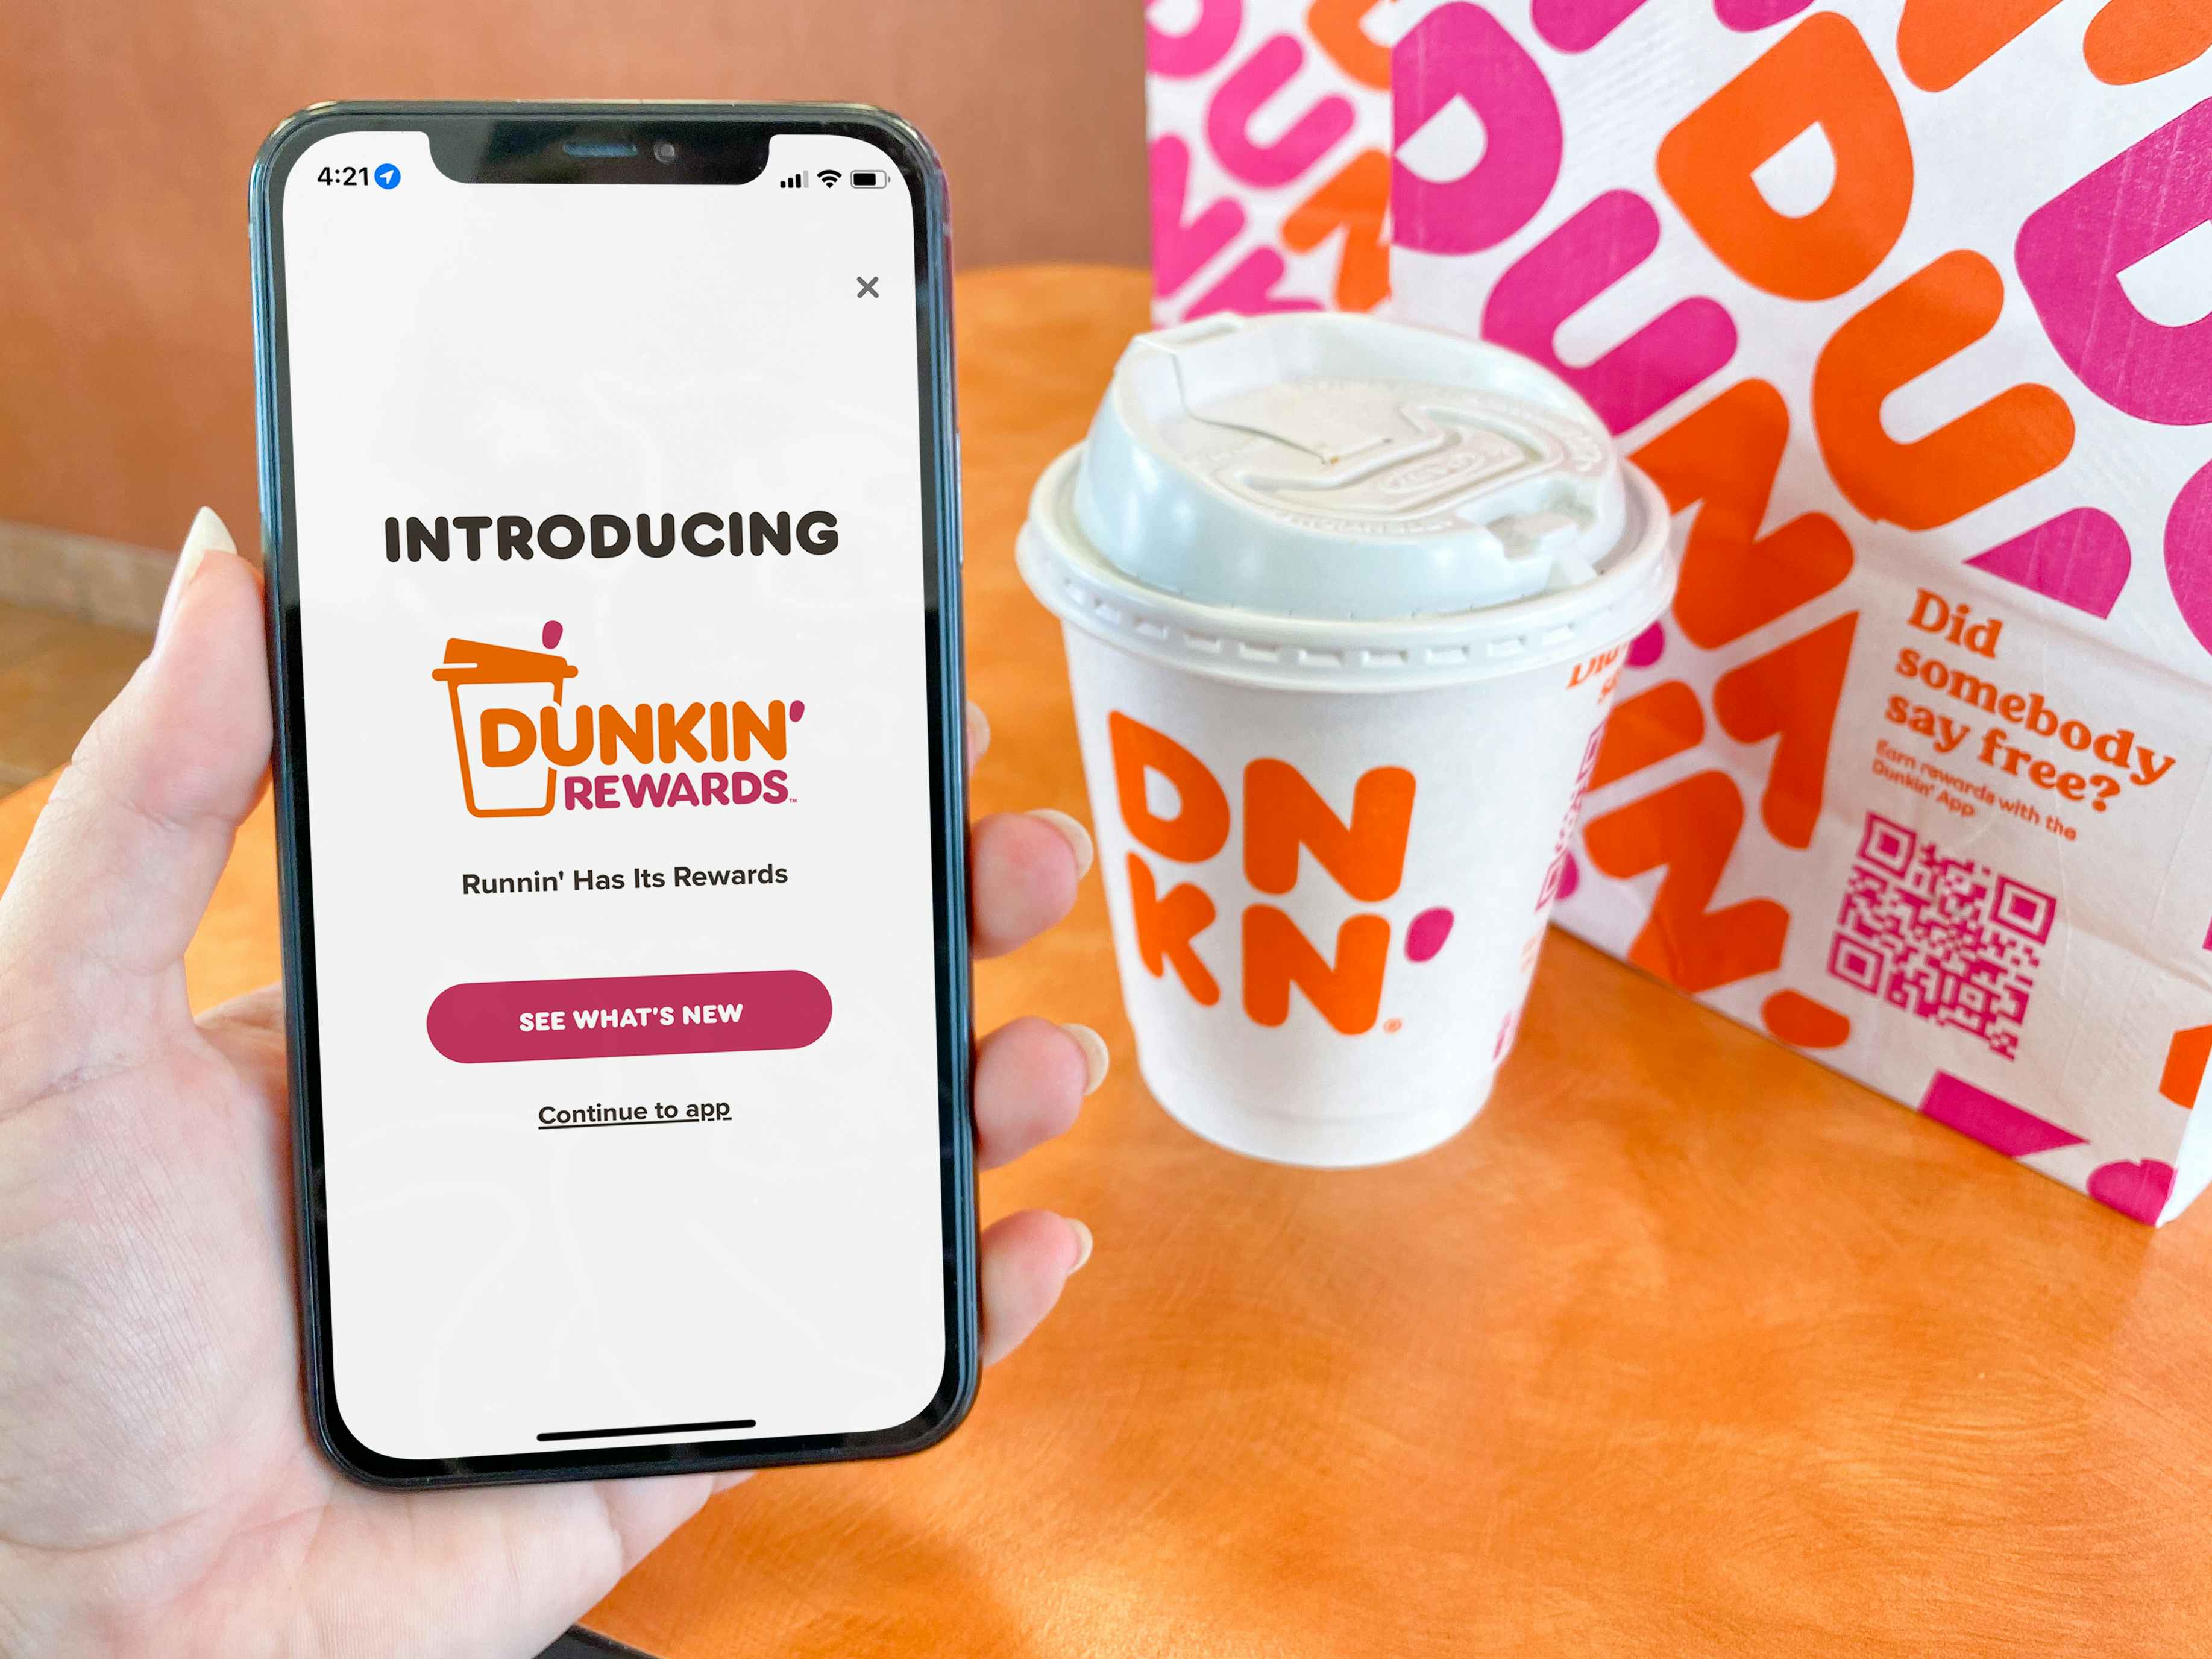 A person holding a cell phone displaying the intro page for the new Dunkin Rewards app next to a coffee and food bag on a table.